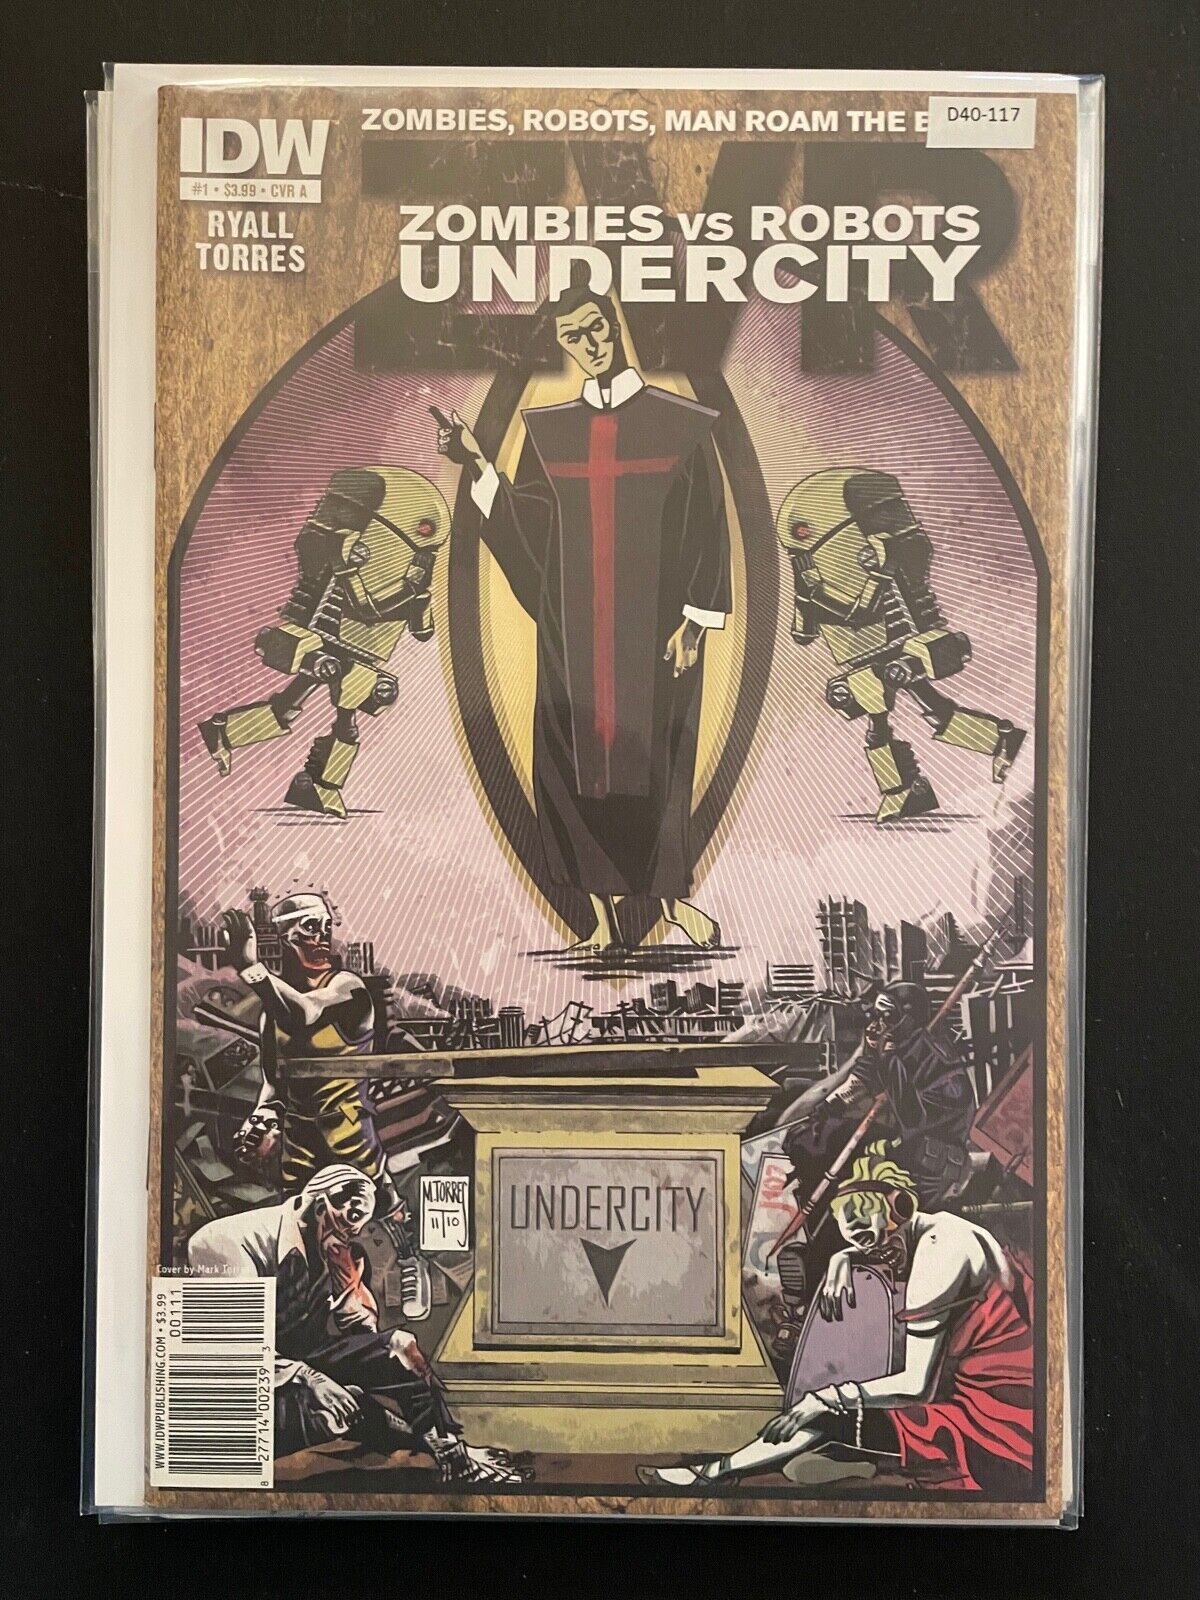 Zombies vs Robots Undercity 1 Cover A Higher Grade IDW Comic Book D40-117